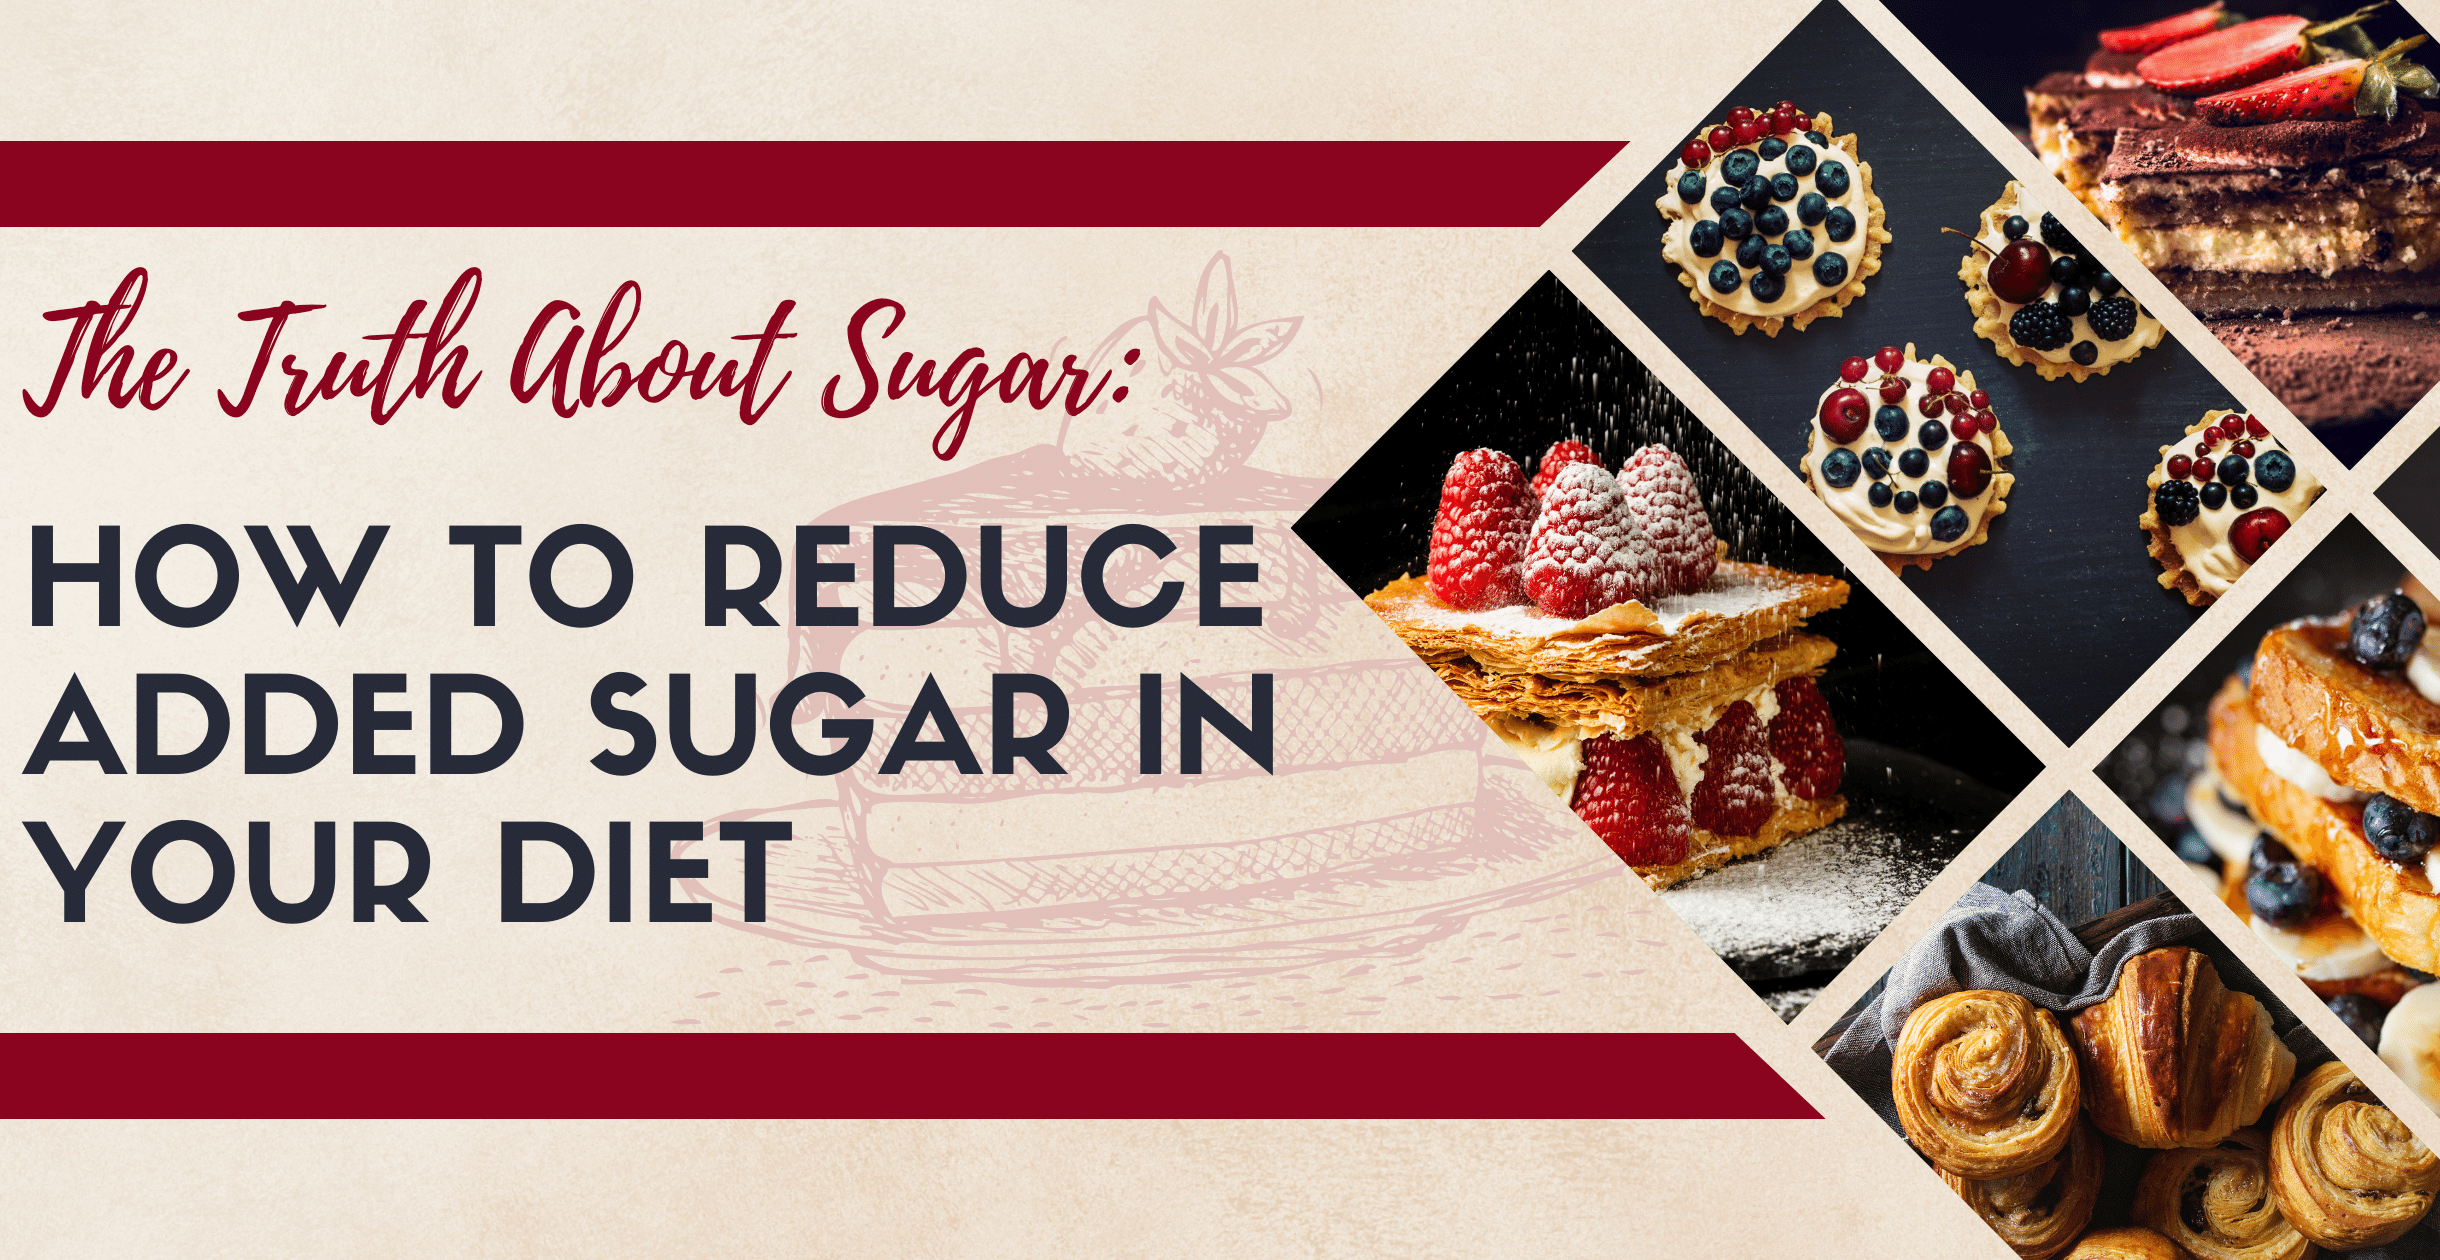 The Truth About Sugar: How to Reduce Added Sugar in Your Diet